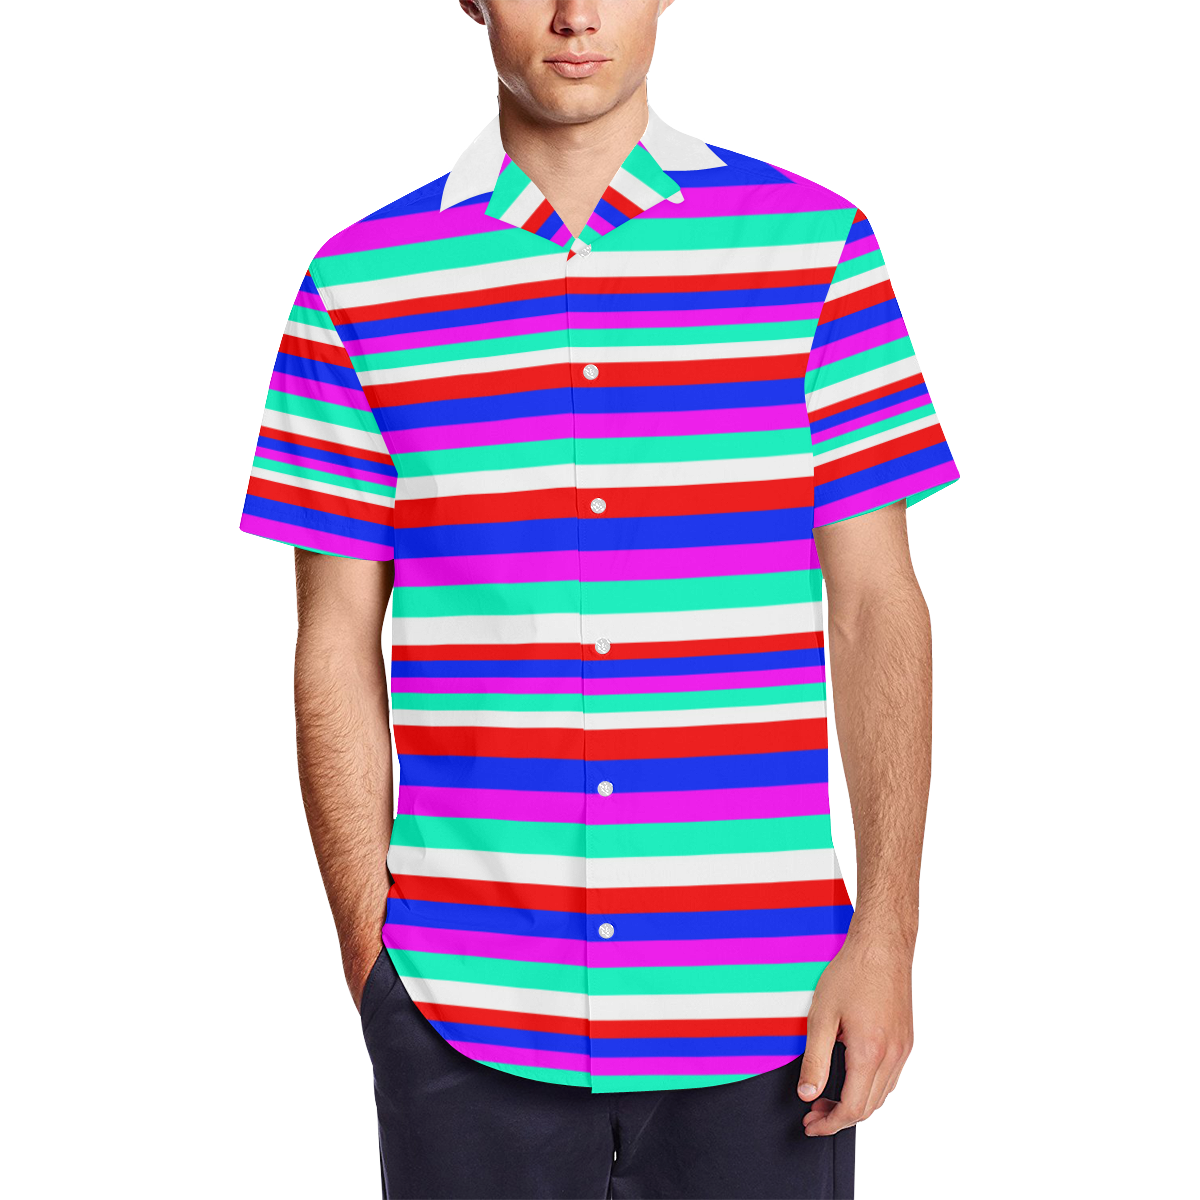 Colored Stripes - Fire Red Royal Blue Pink Mint Wh Men's Short Sleeve Shirt with Lapel Collar (Model T54)